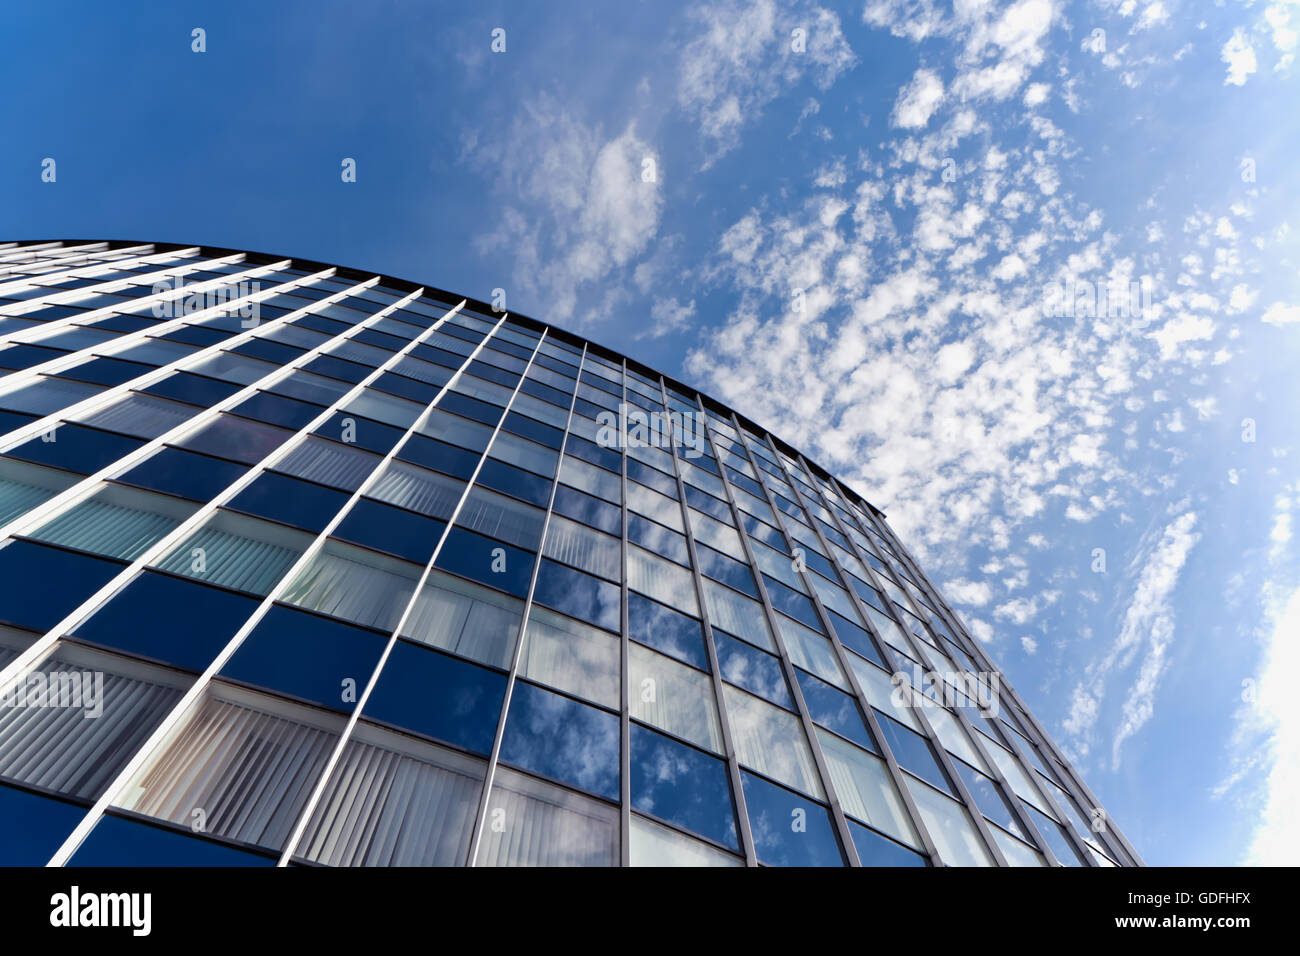 Sky reflecting in glass facade of an office building Stock Photo